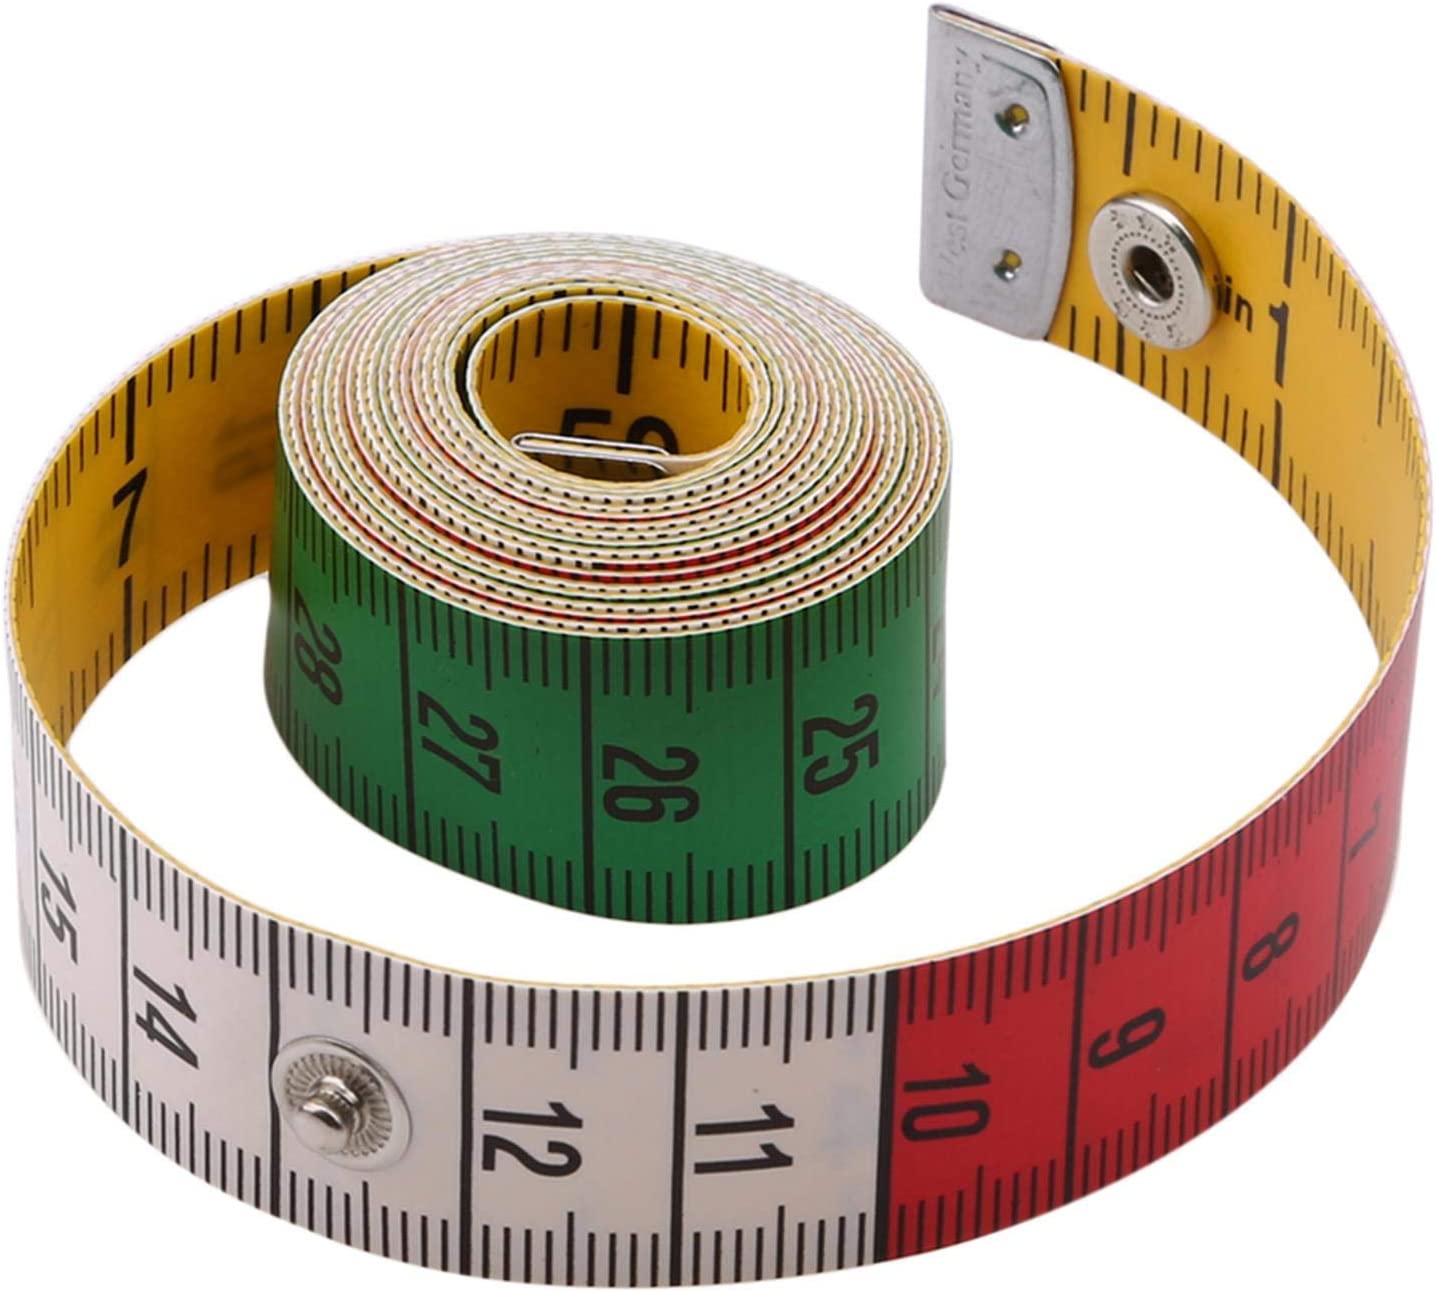 60 Inch/150cm Flexible Tape Measure for Body Fabric Sewing Knitting Home  Craft Dual Sided Measurements Soft Tape with Snap Button Closure